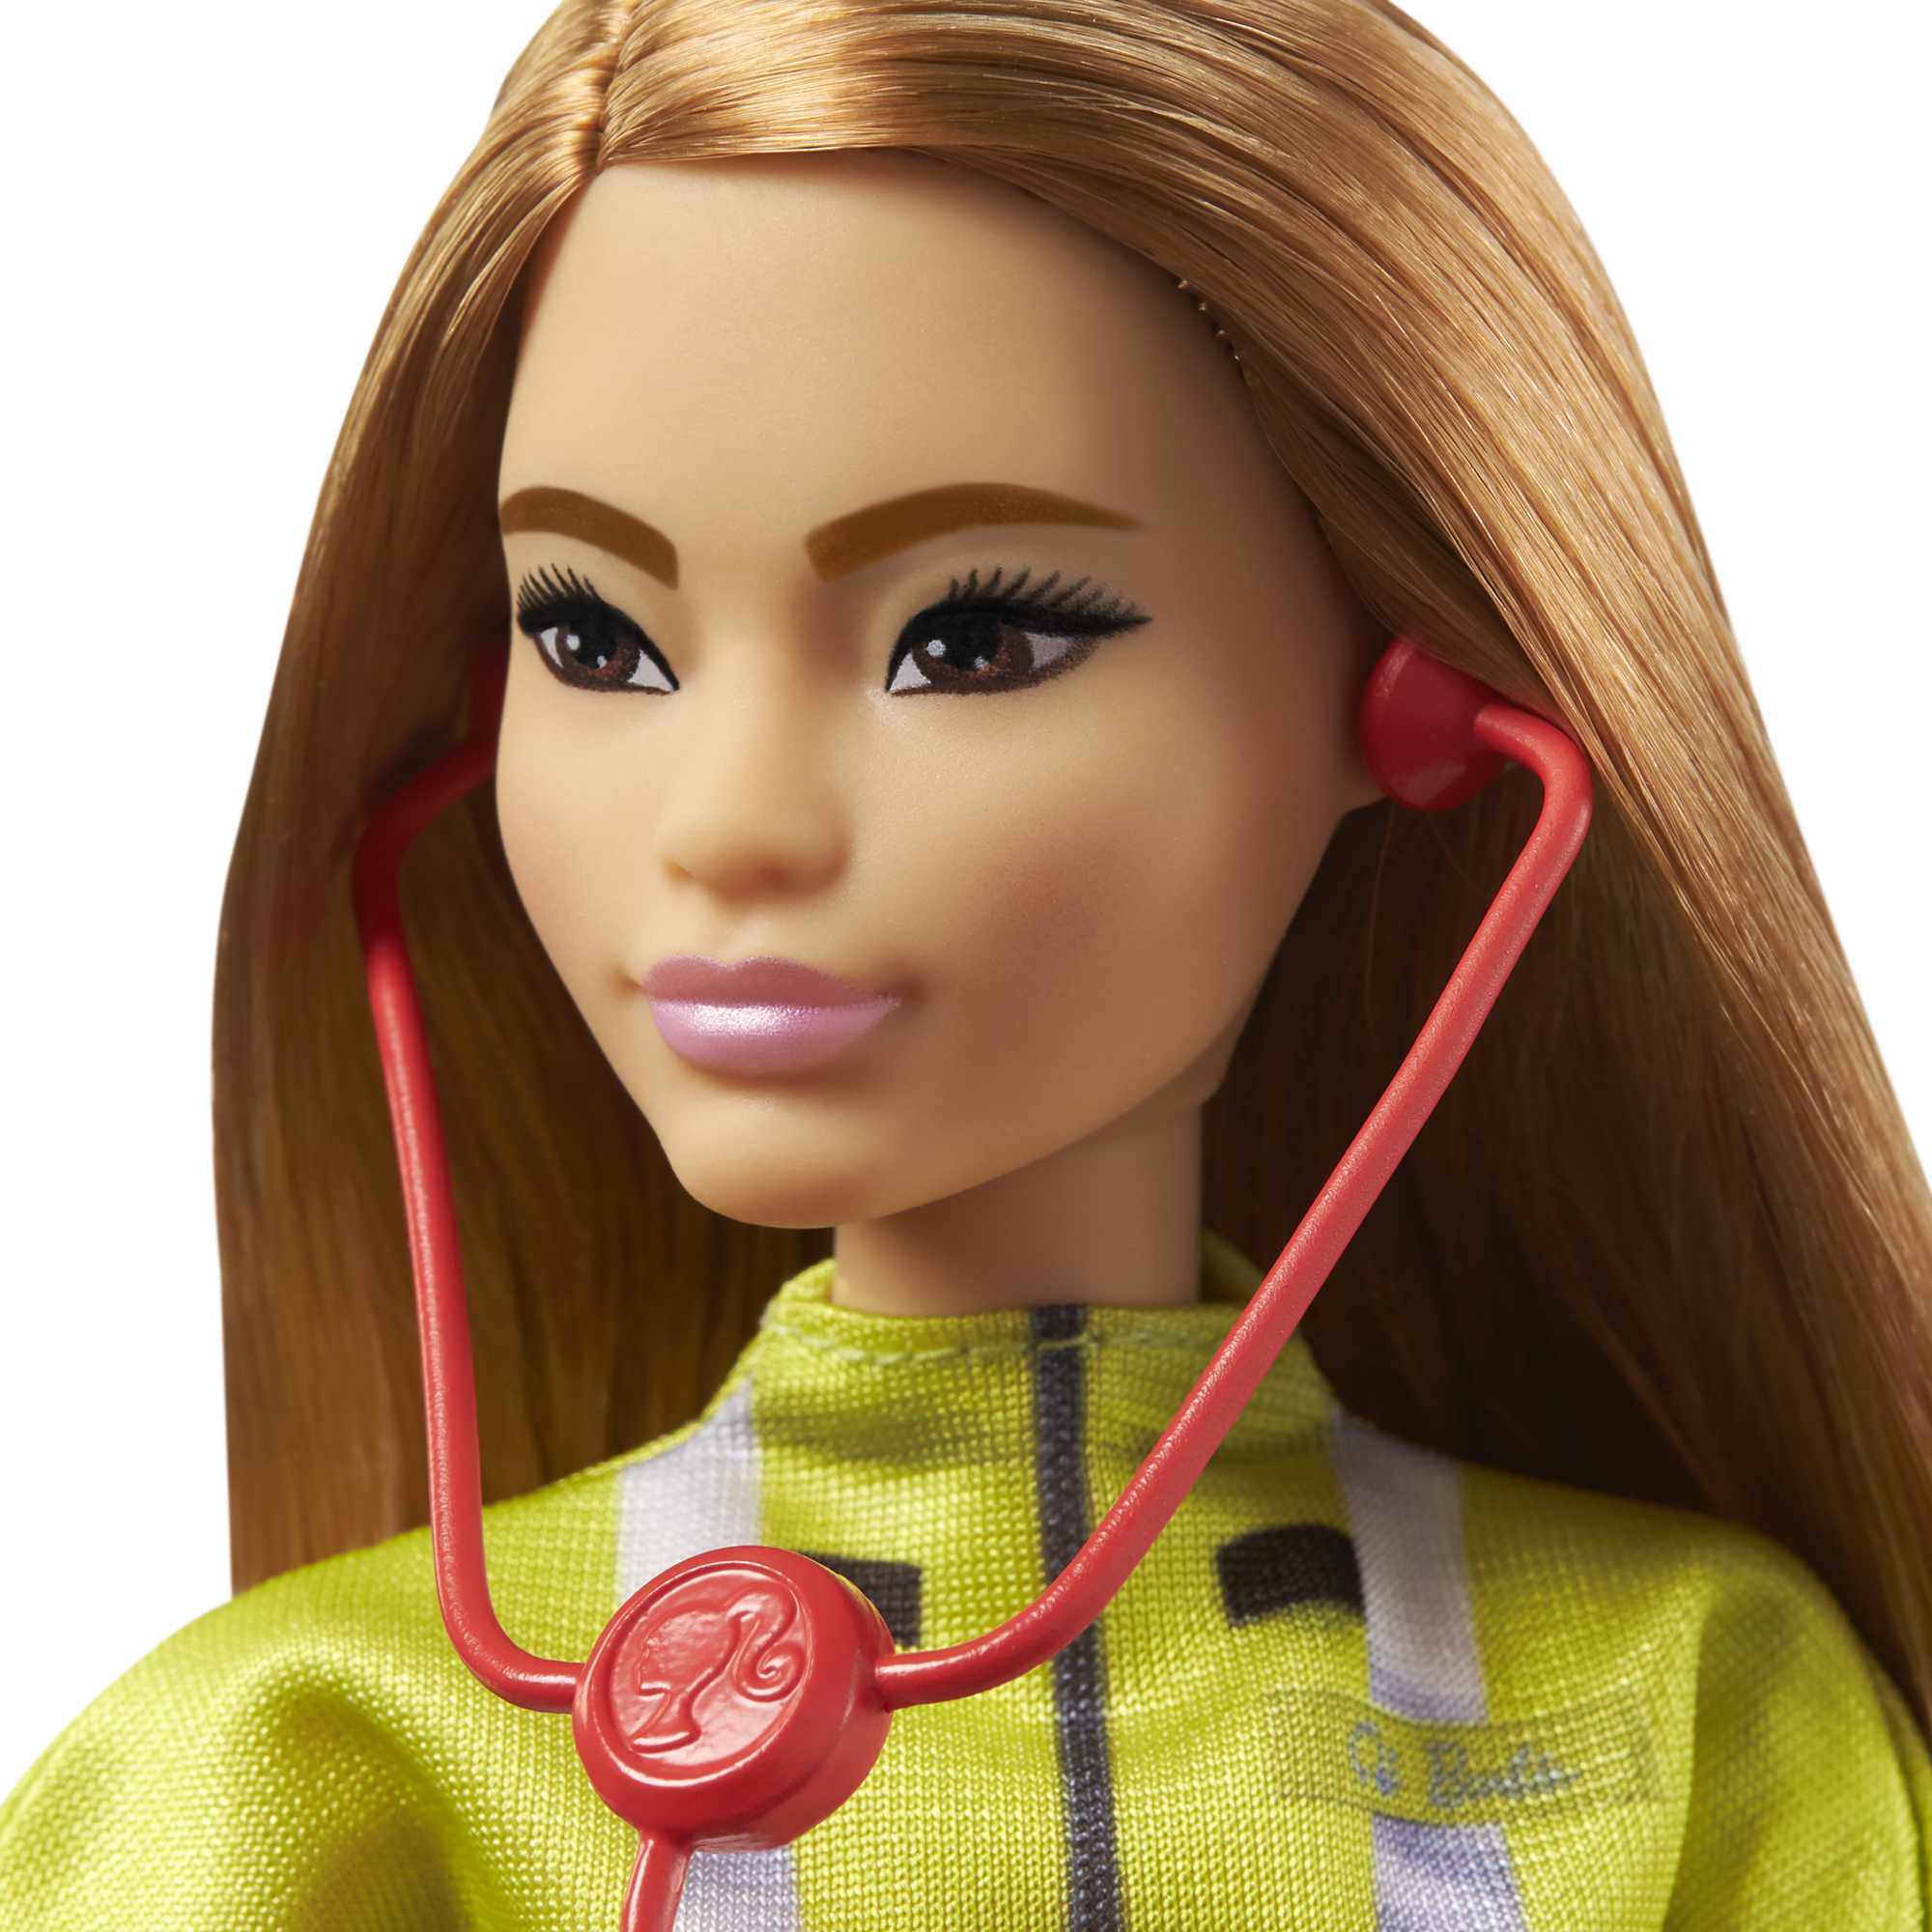 Barbie Paramedic Petite Fashion Doll with Brunette Hair, Stethoscope, Medical Bag & Accessories - image 5 of 6